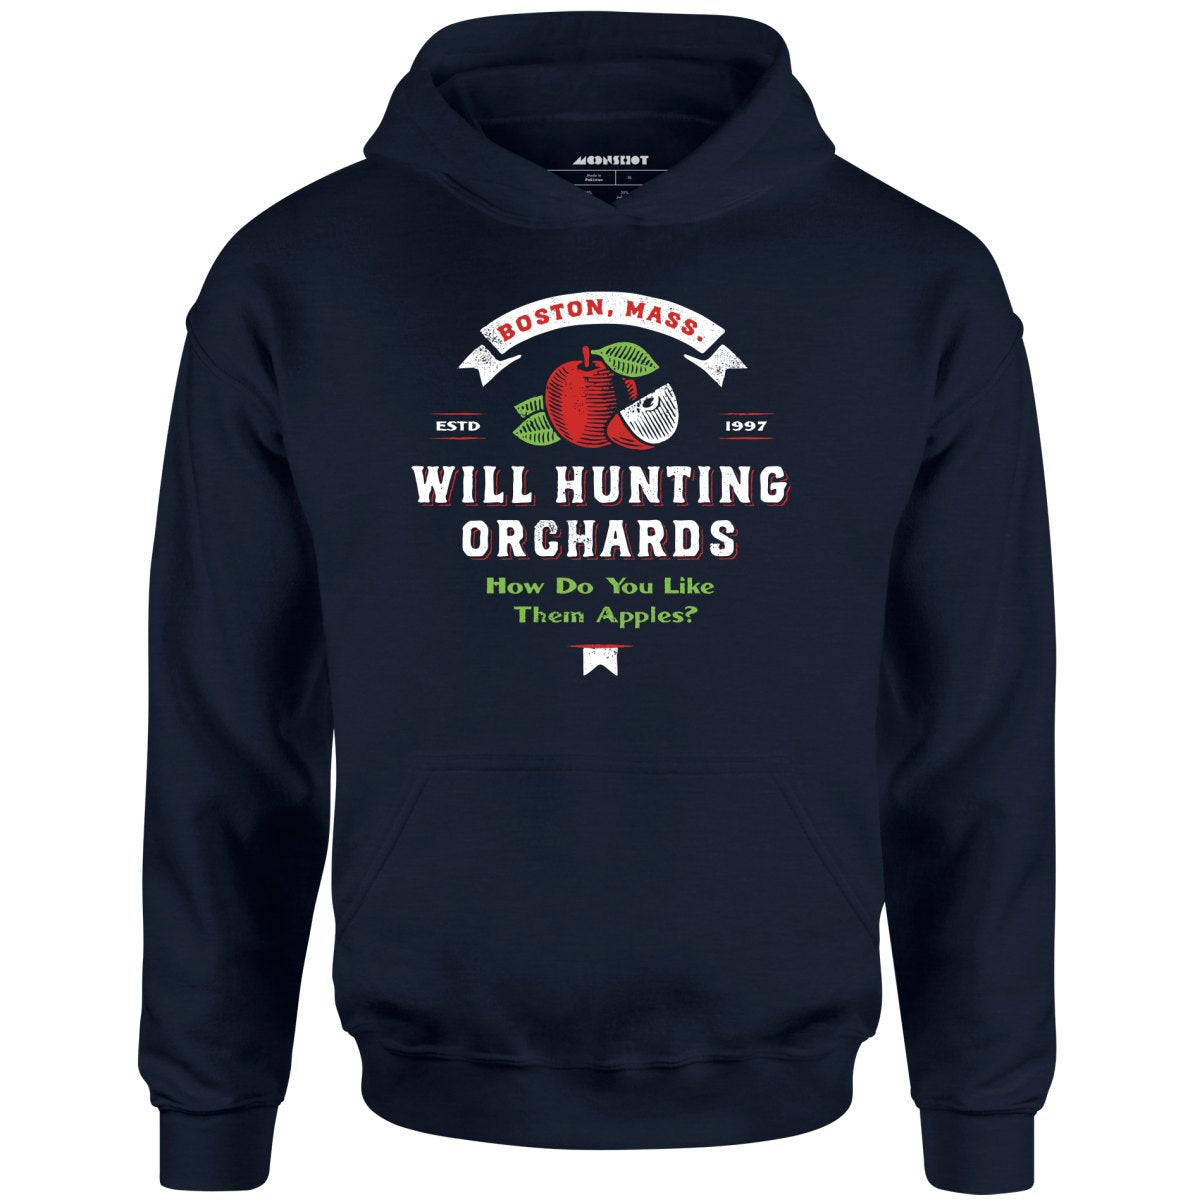 Will Hunting Orchards - Unisex Hoodie